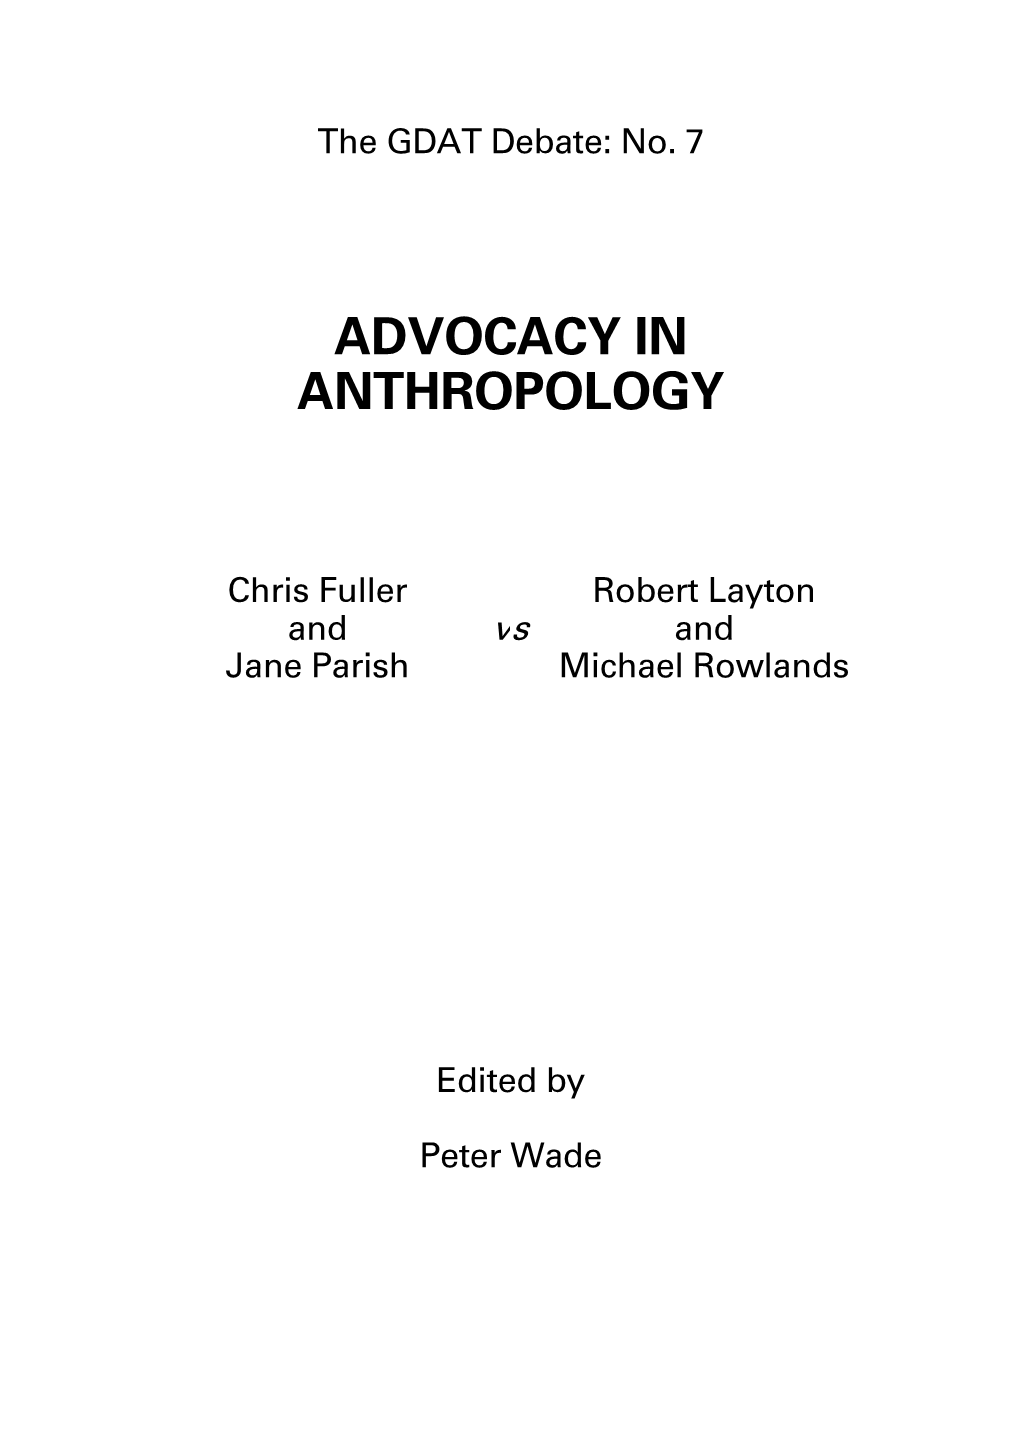 Advocacy in Anthropology